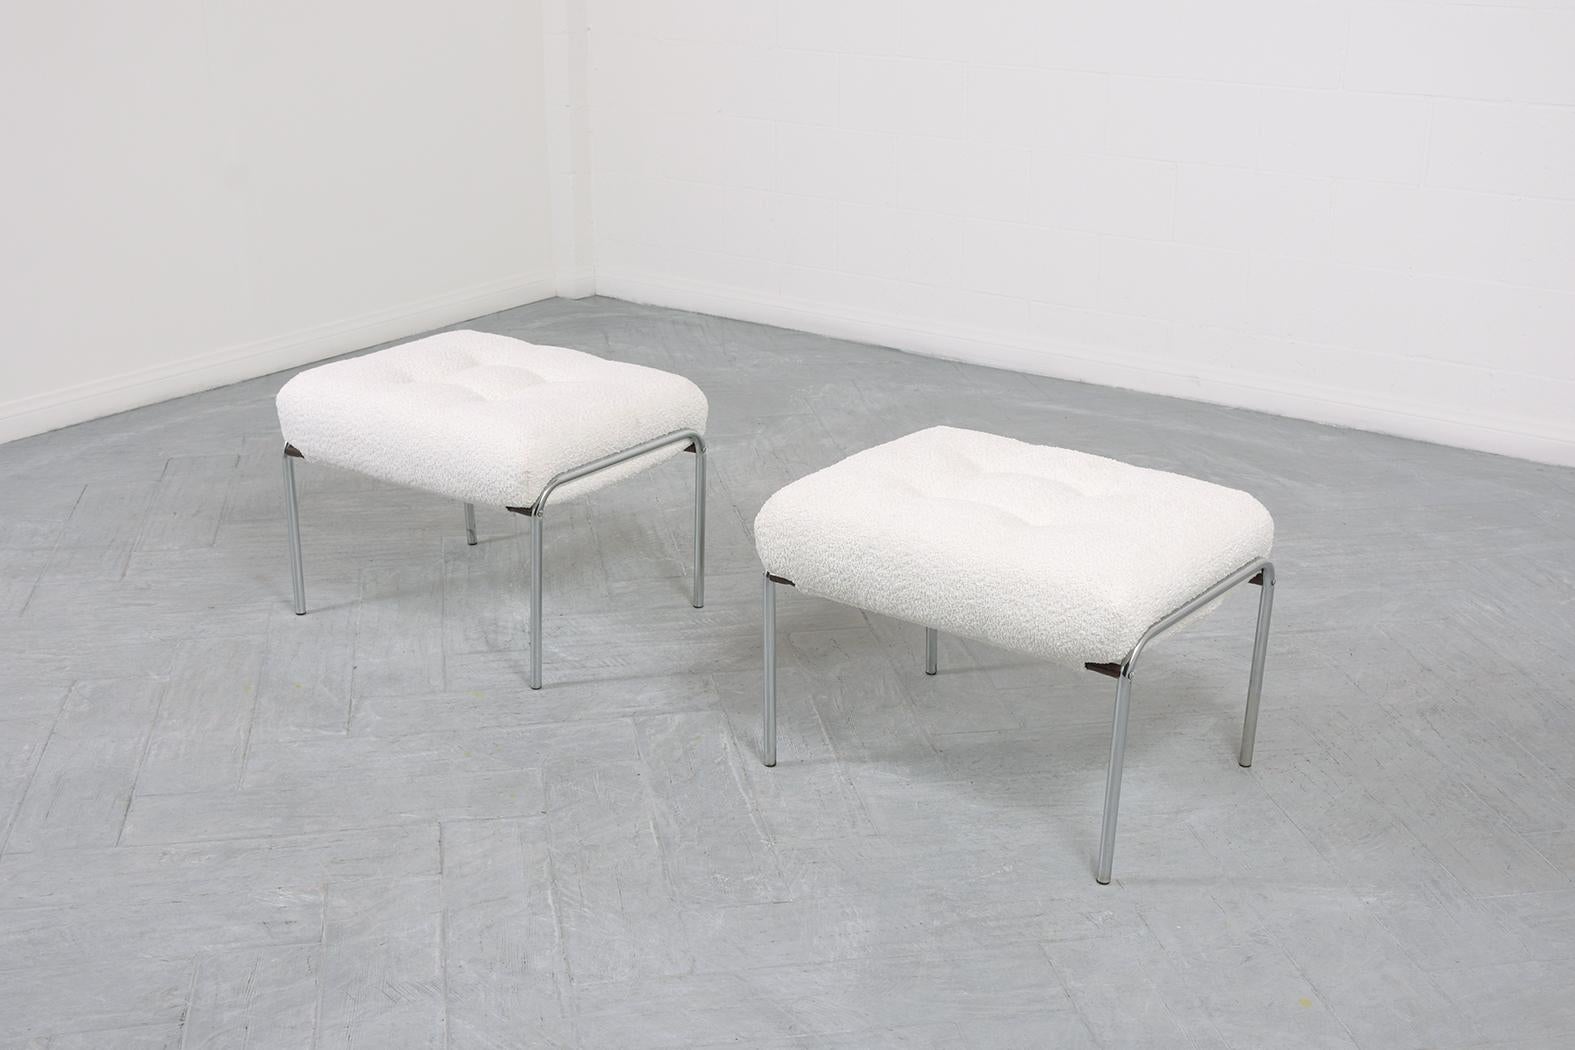 American Vintage Mid-Century Modern Boucle Stools: A Fusion of Craftsmanship & Elegance For Sale